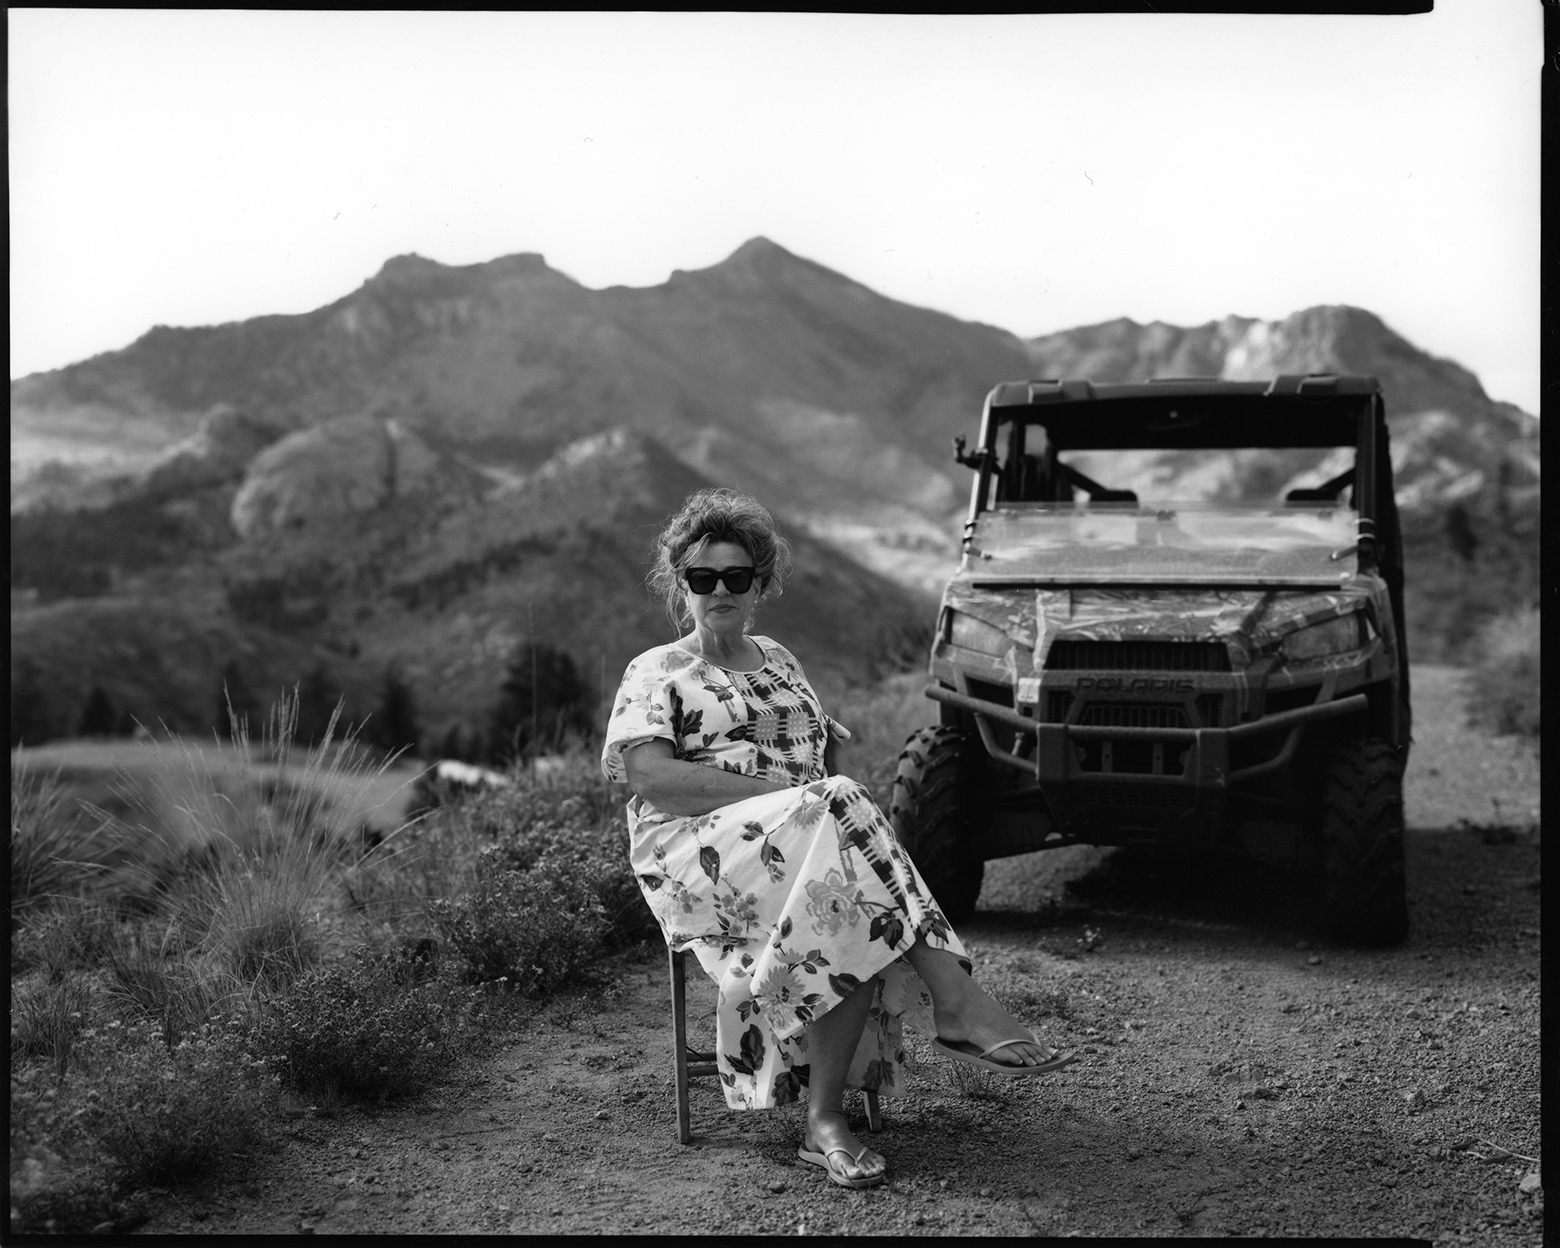 Tammy sits on a chair with her legs crossed on a dirt road in front of a jeep with hills in the background in Westcreek, Colorado. Tammy has on dark glasses as she looks toward the camera wearing a long, white, flower-print dress and sandals.